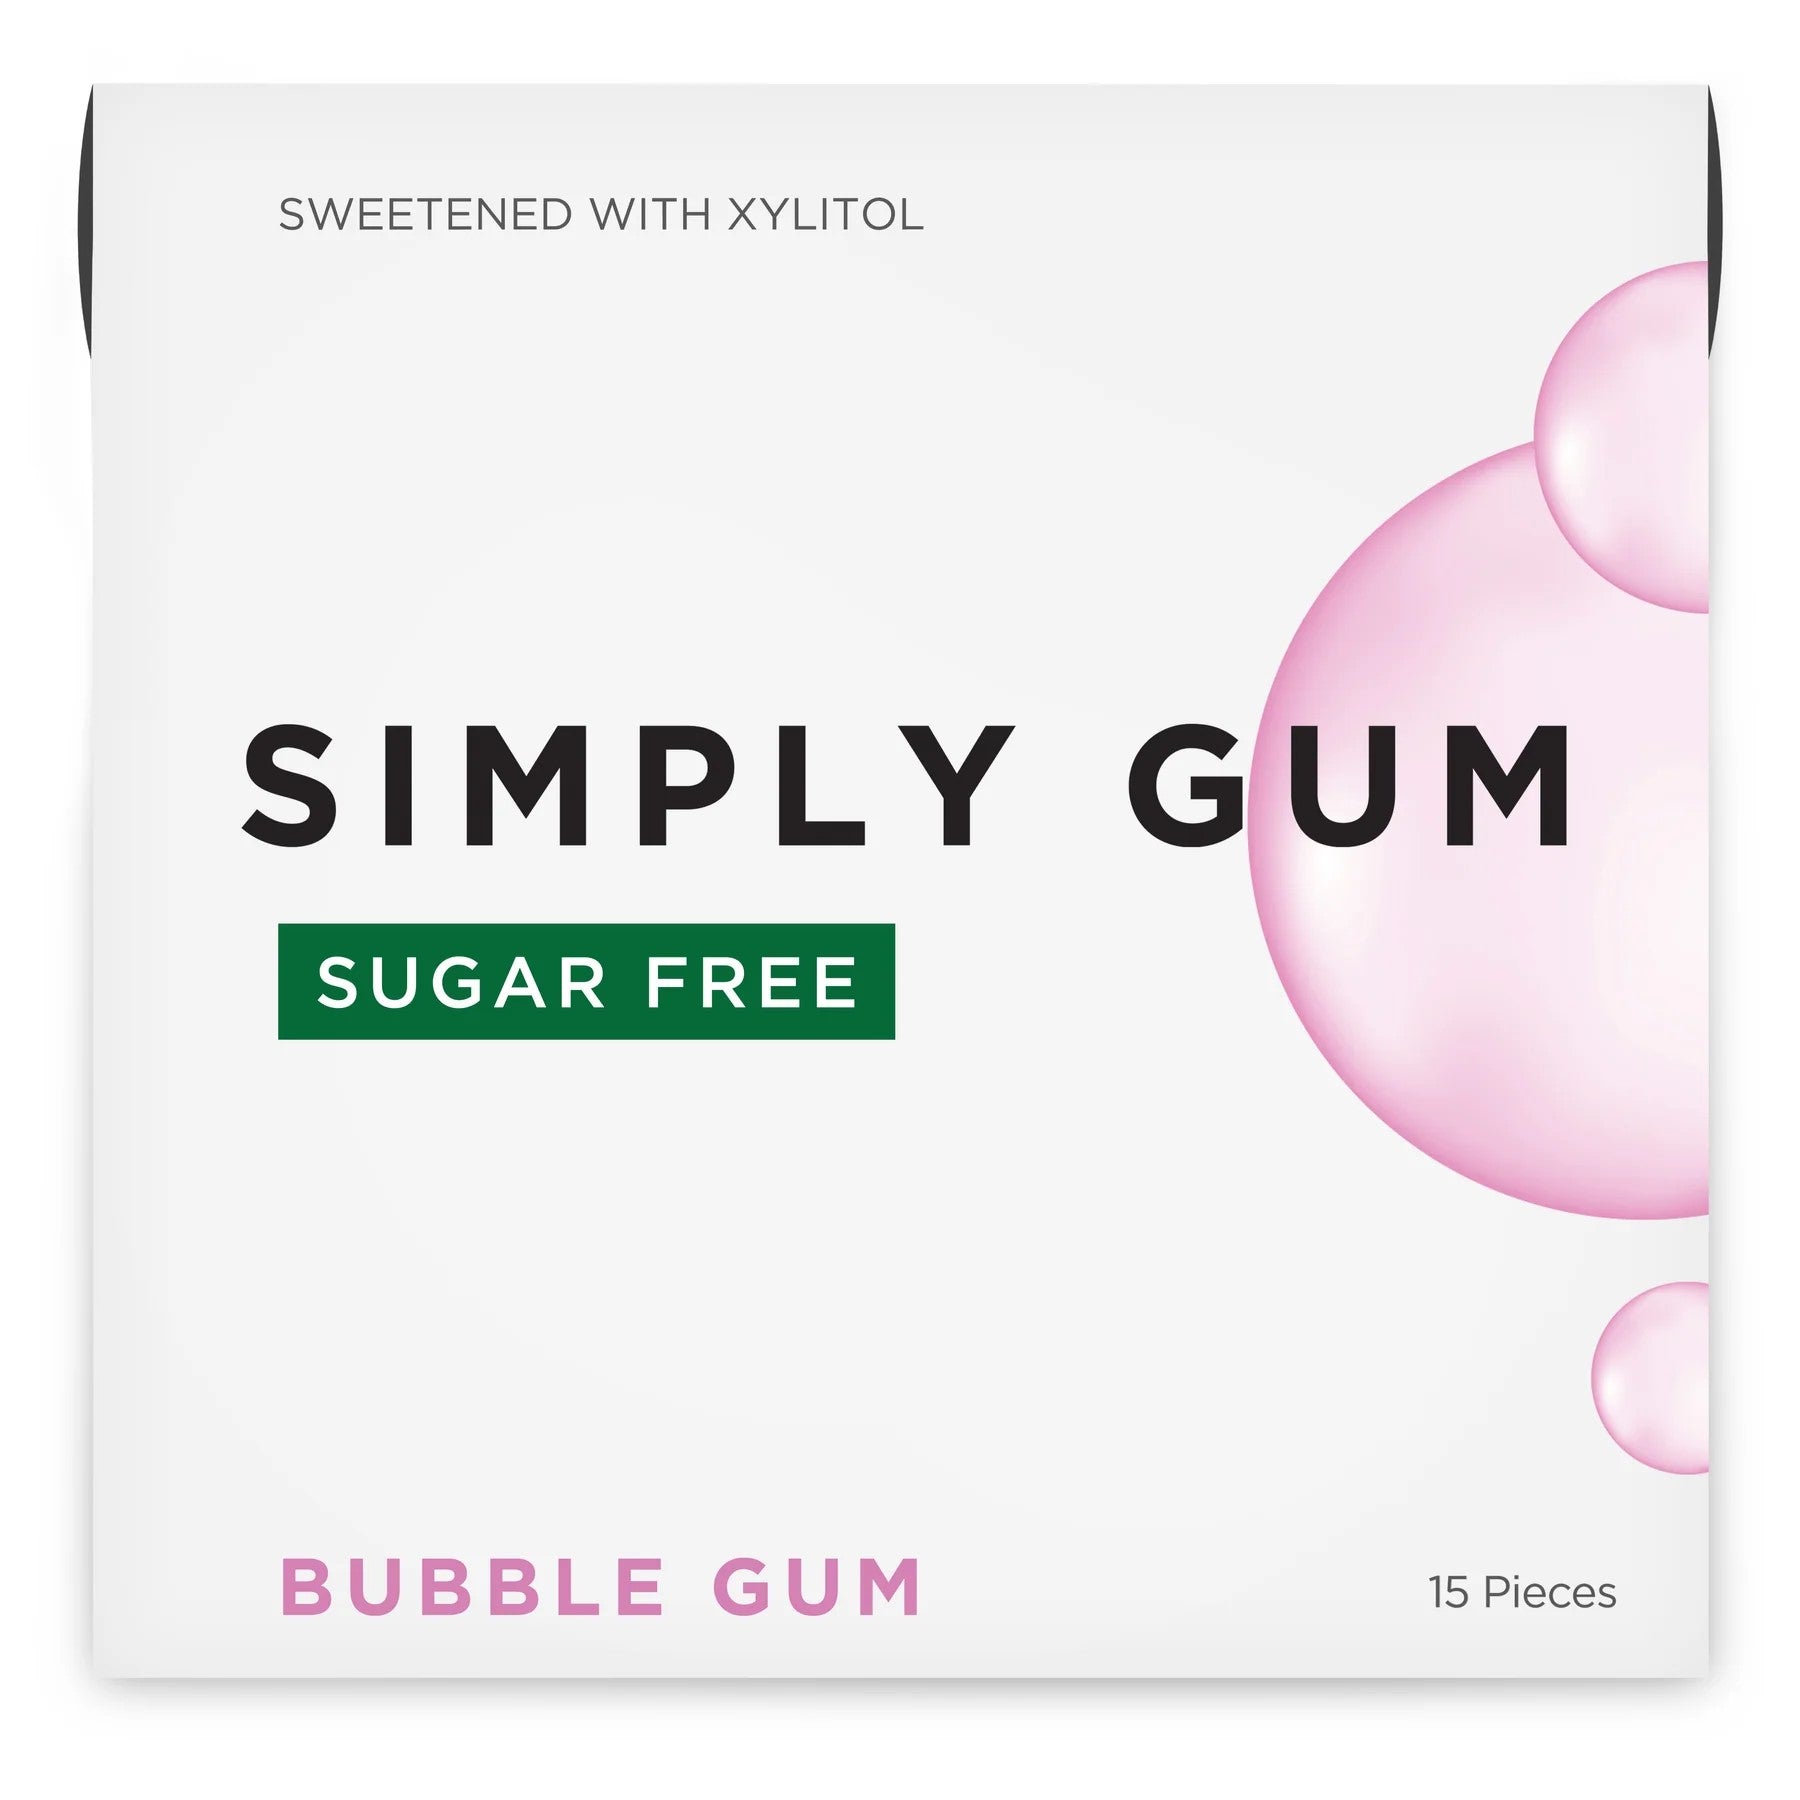 You asked and we delivered: Our beloved chewing gum is now available sugar free! Made with xylitol, our new Sugar-Free gum has the same refreshing flavor as our original, but without the sugar.